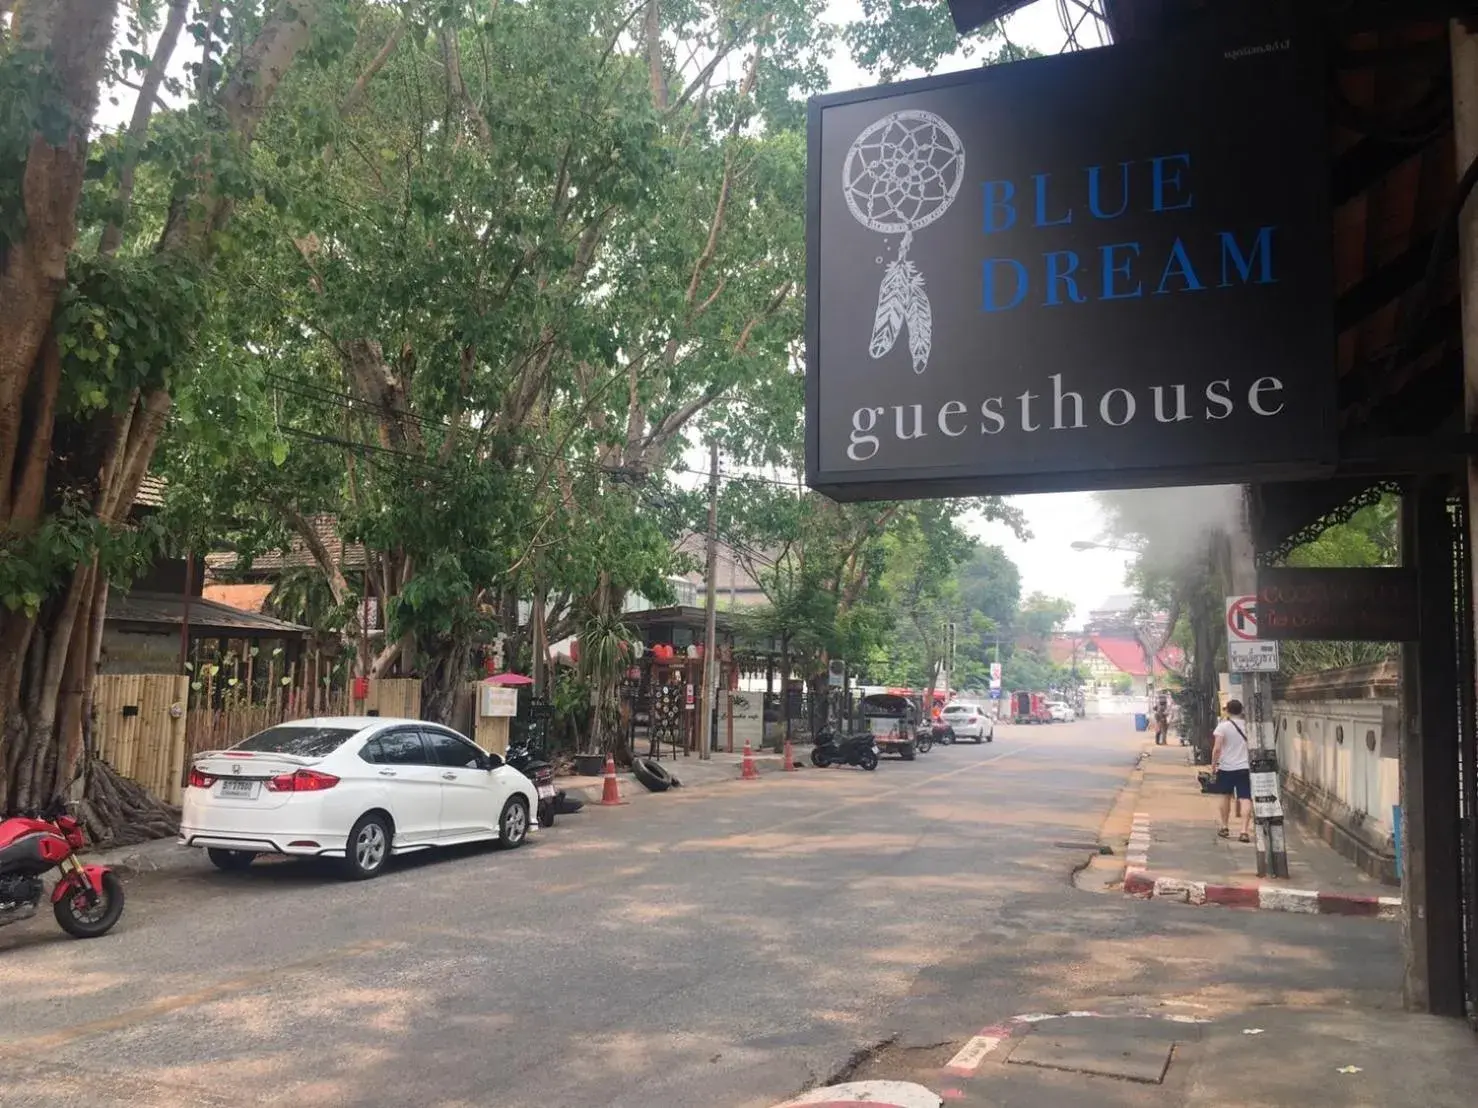 Property building in Blue Dream Guesthouse